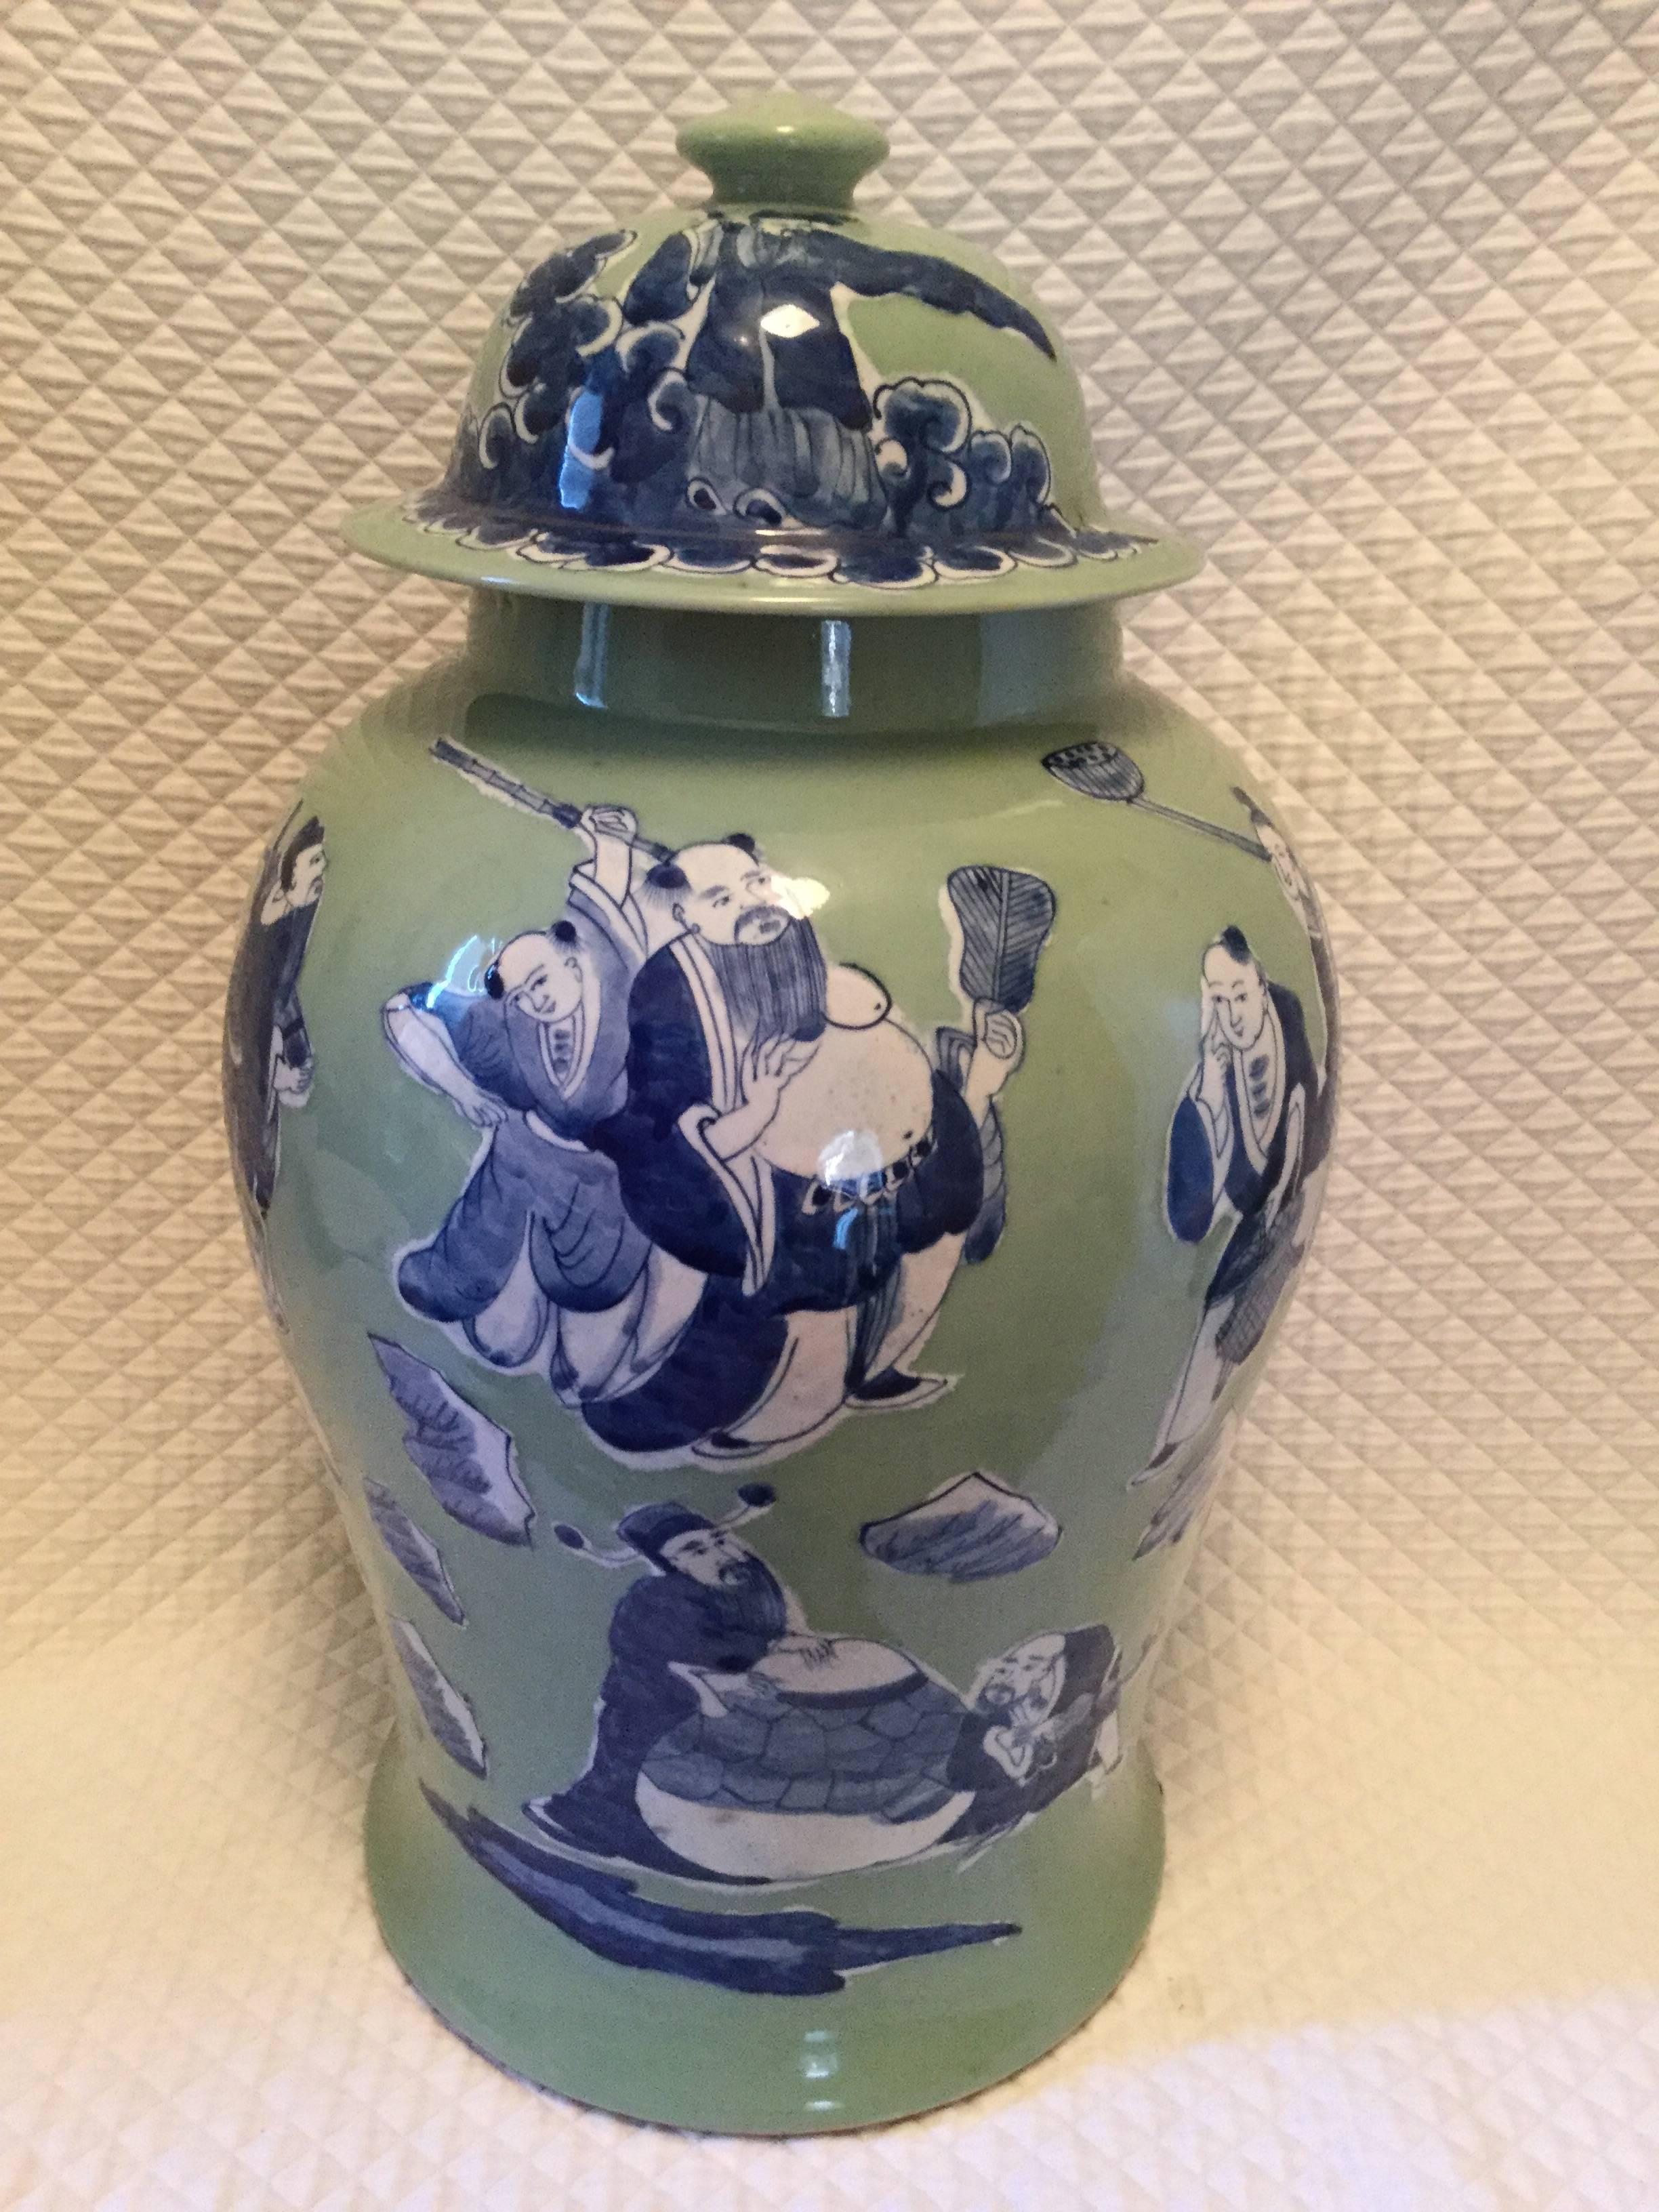 Chinese Export Baluster jars with Chinese warlord/warrior design. Blue and white on celadon background. Design only on one side. Warlords/warriors facing each other. Nice size and shape.